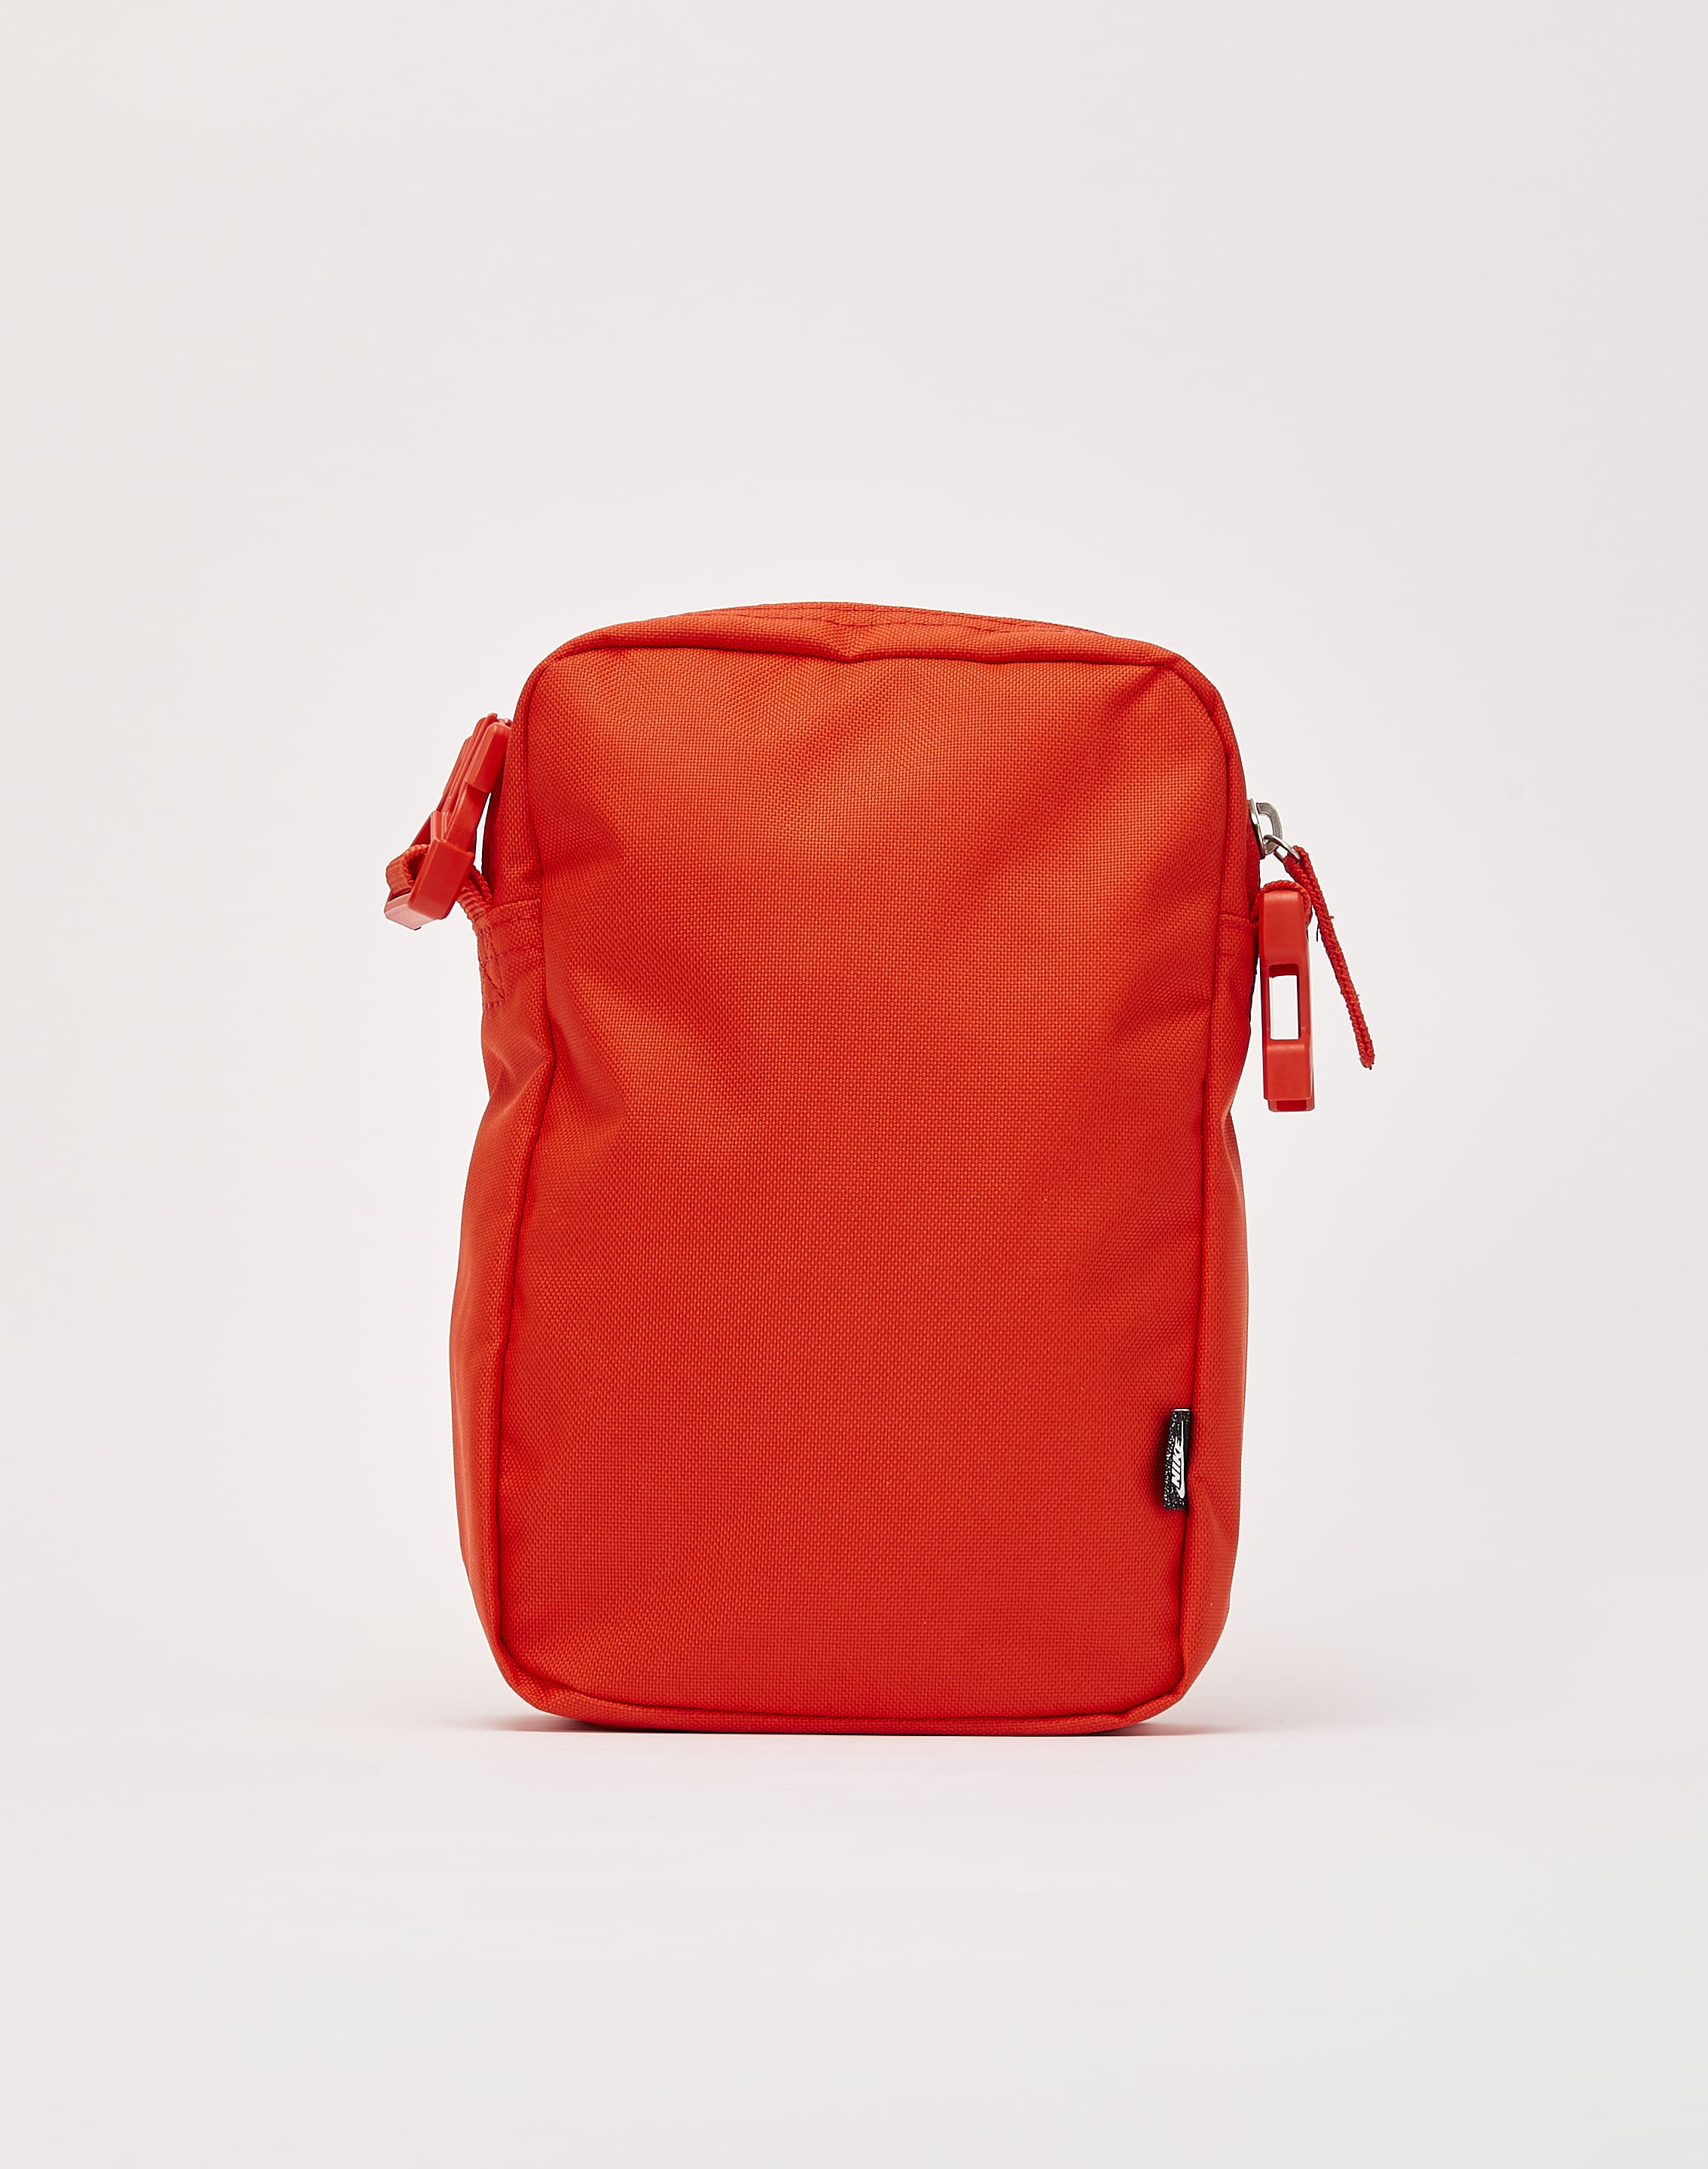 Nike Heritage 4L Crossbody Bag, Picante Red